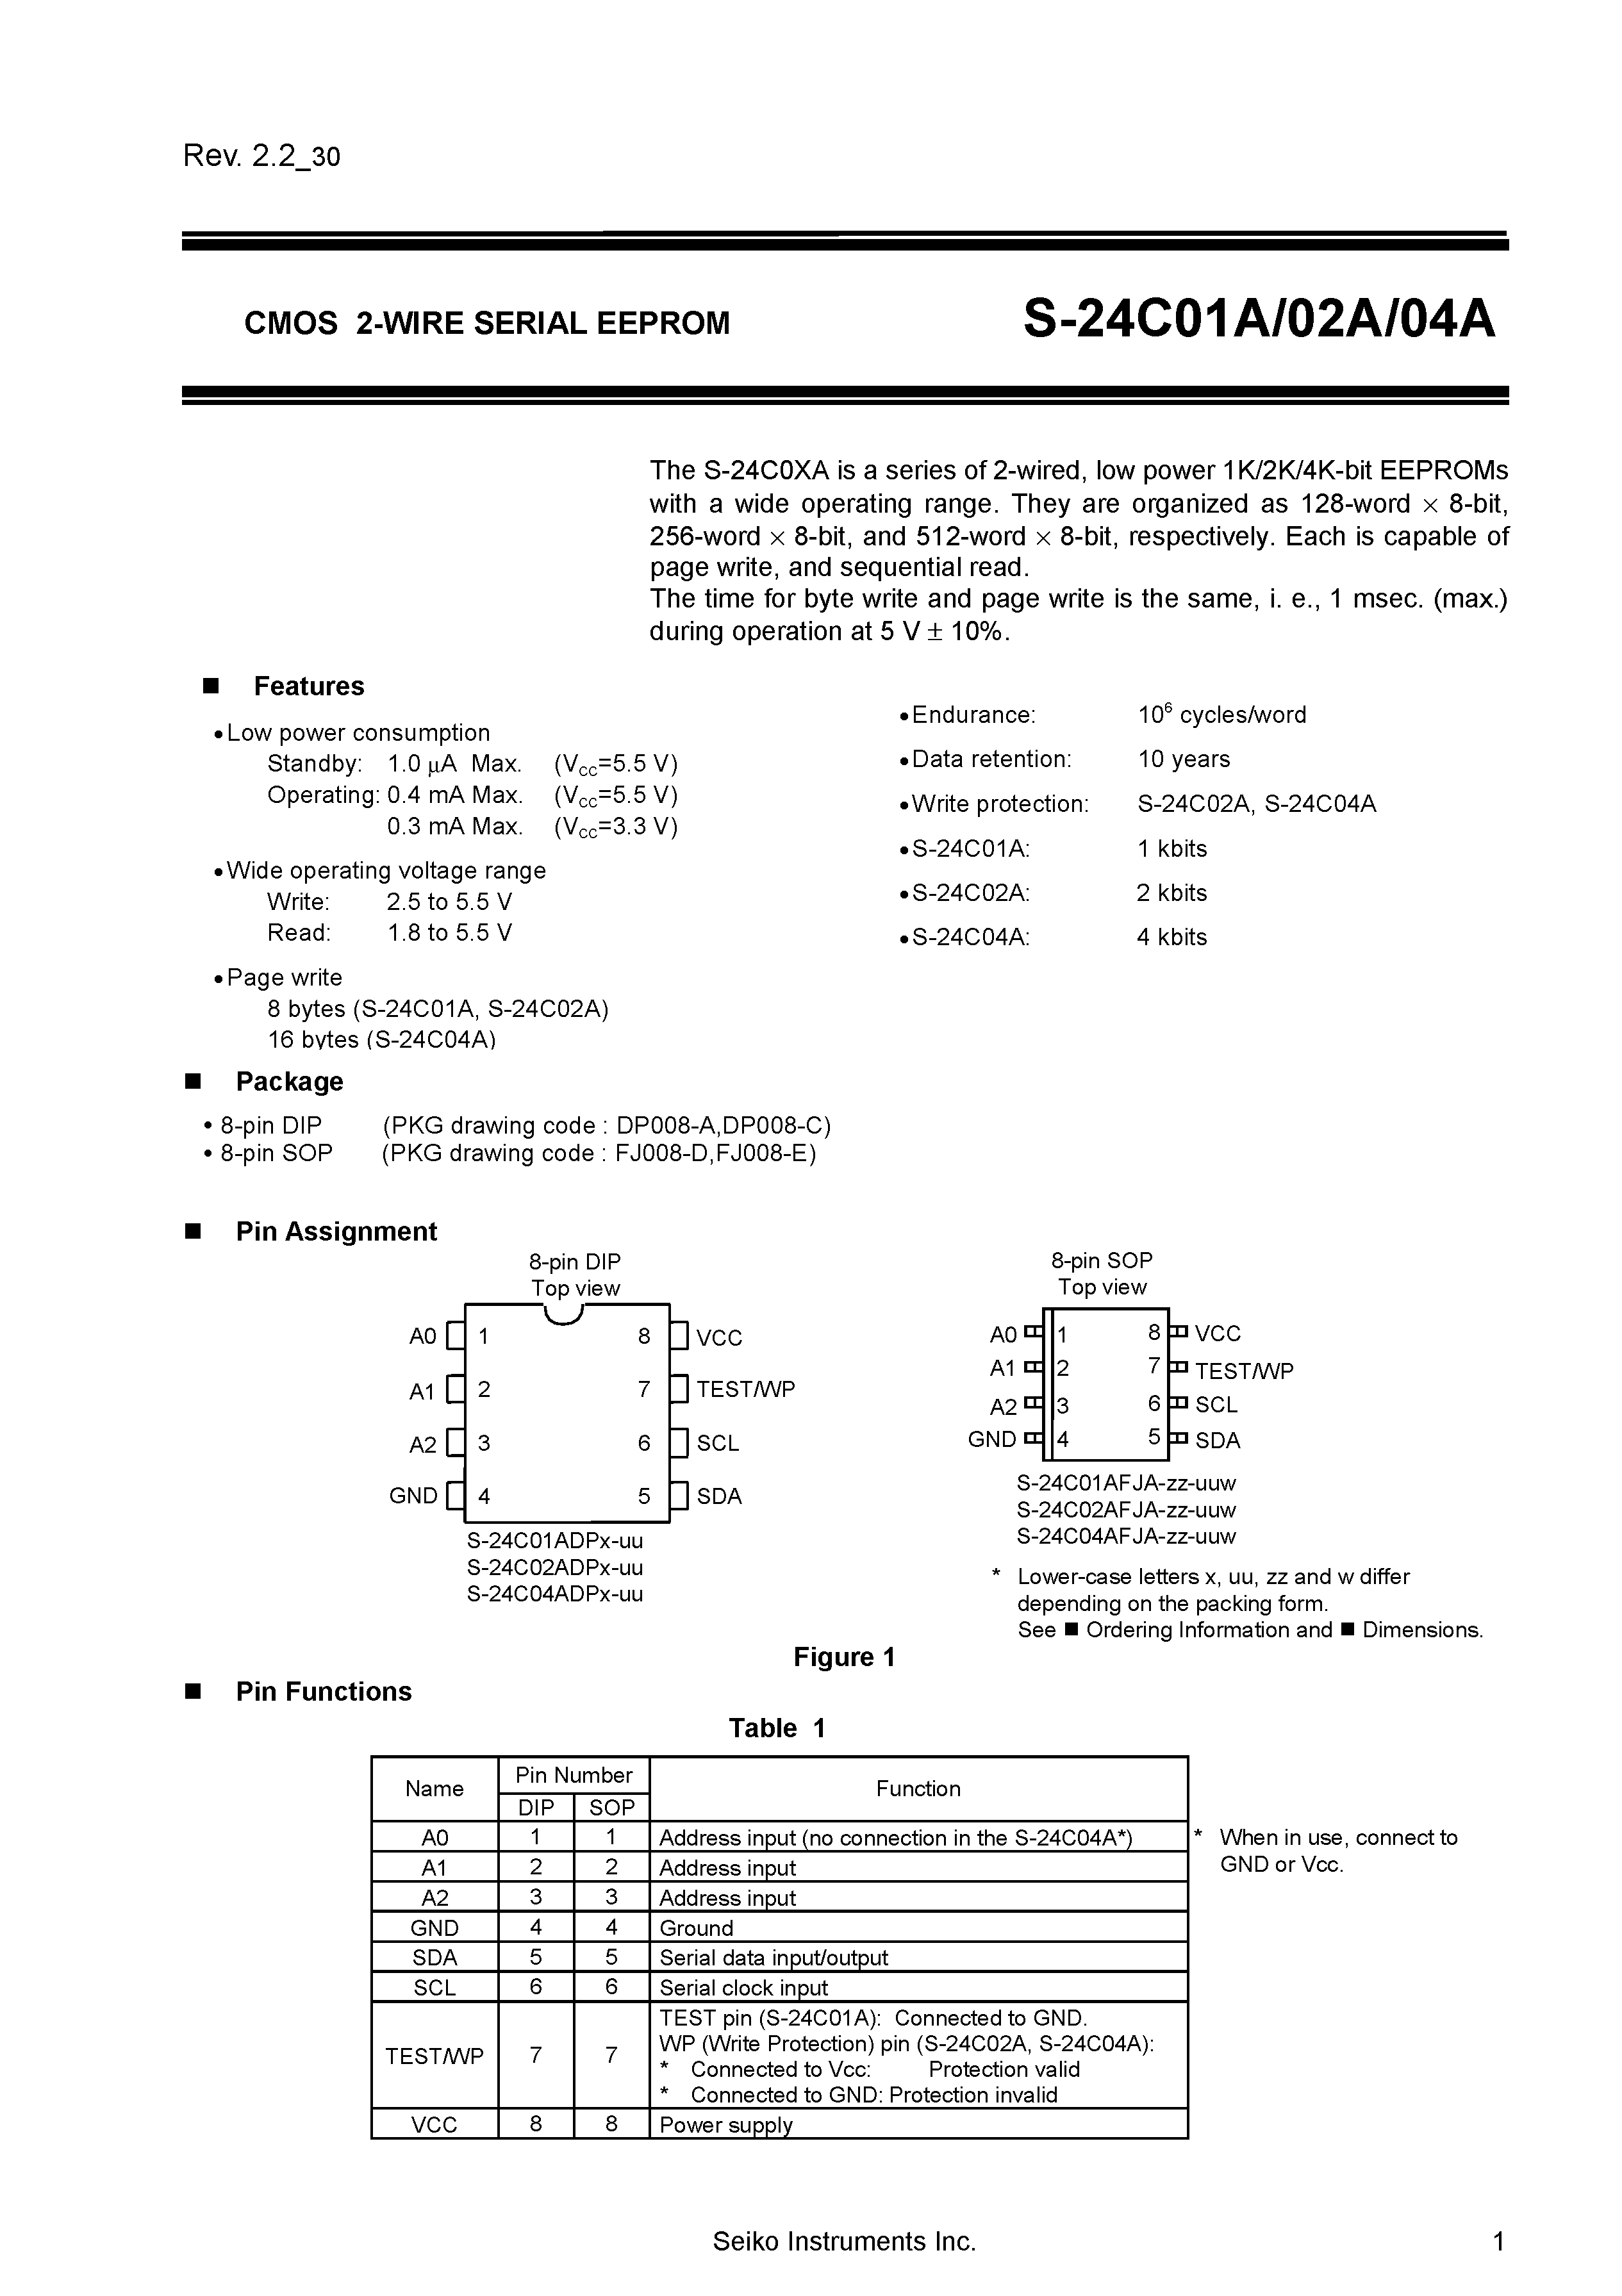 Datasheet S-24C01AFJA-11-S - CMOS 2-WIRE SERIAL EEPROM page 1